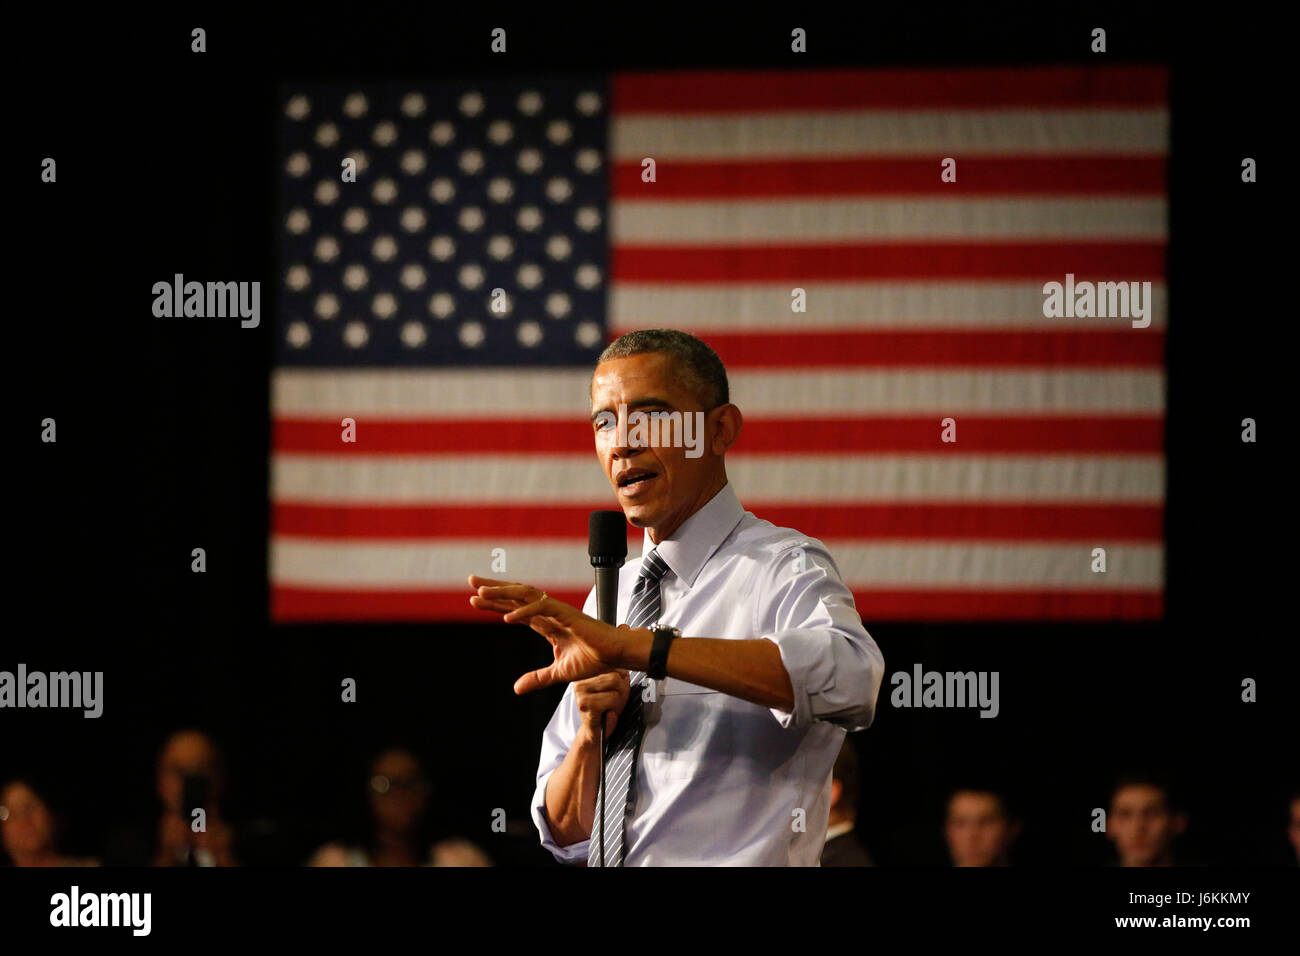 President Barack Obama answers questions during a town hall meeting at Ivy Tech in Indianapolis. Obama talked about his proposal to offer two years of free community college to eligible students, at Ivy Tech Community College. The program would require students to maintain at least a 2.5 GPA. Stock Photo